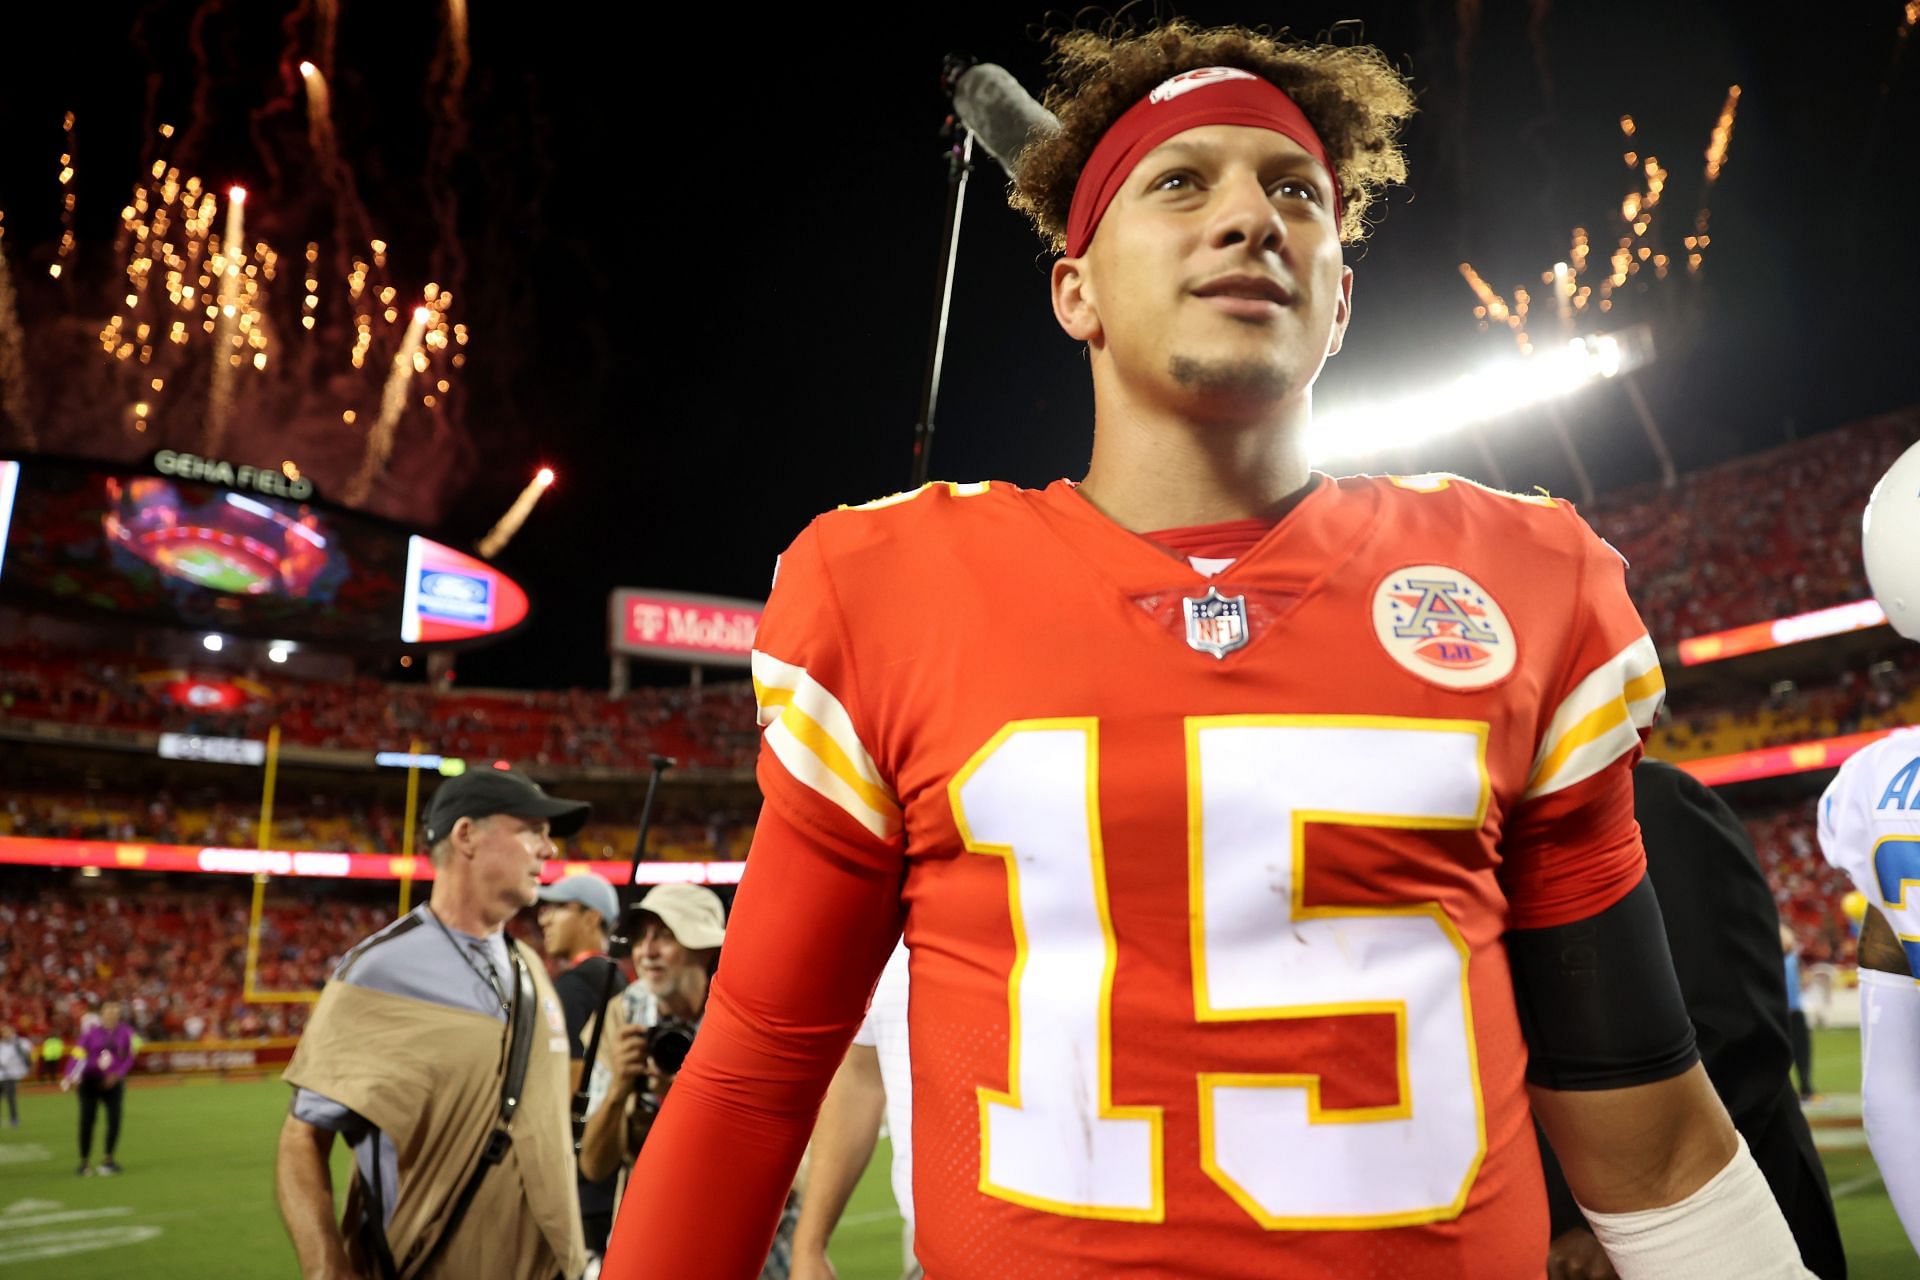 Patrick Mahomes' best teammate? His ❤️ baby Sterling, who just